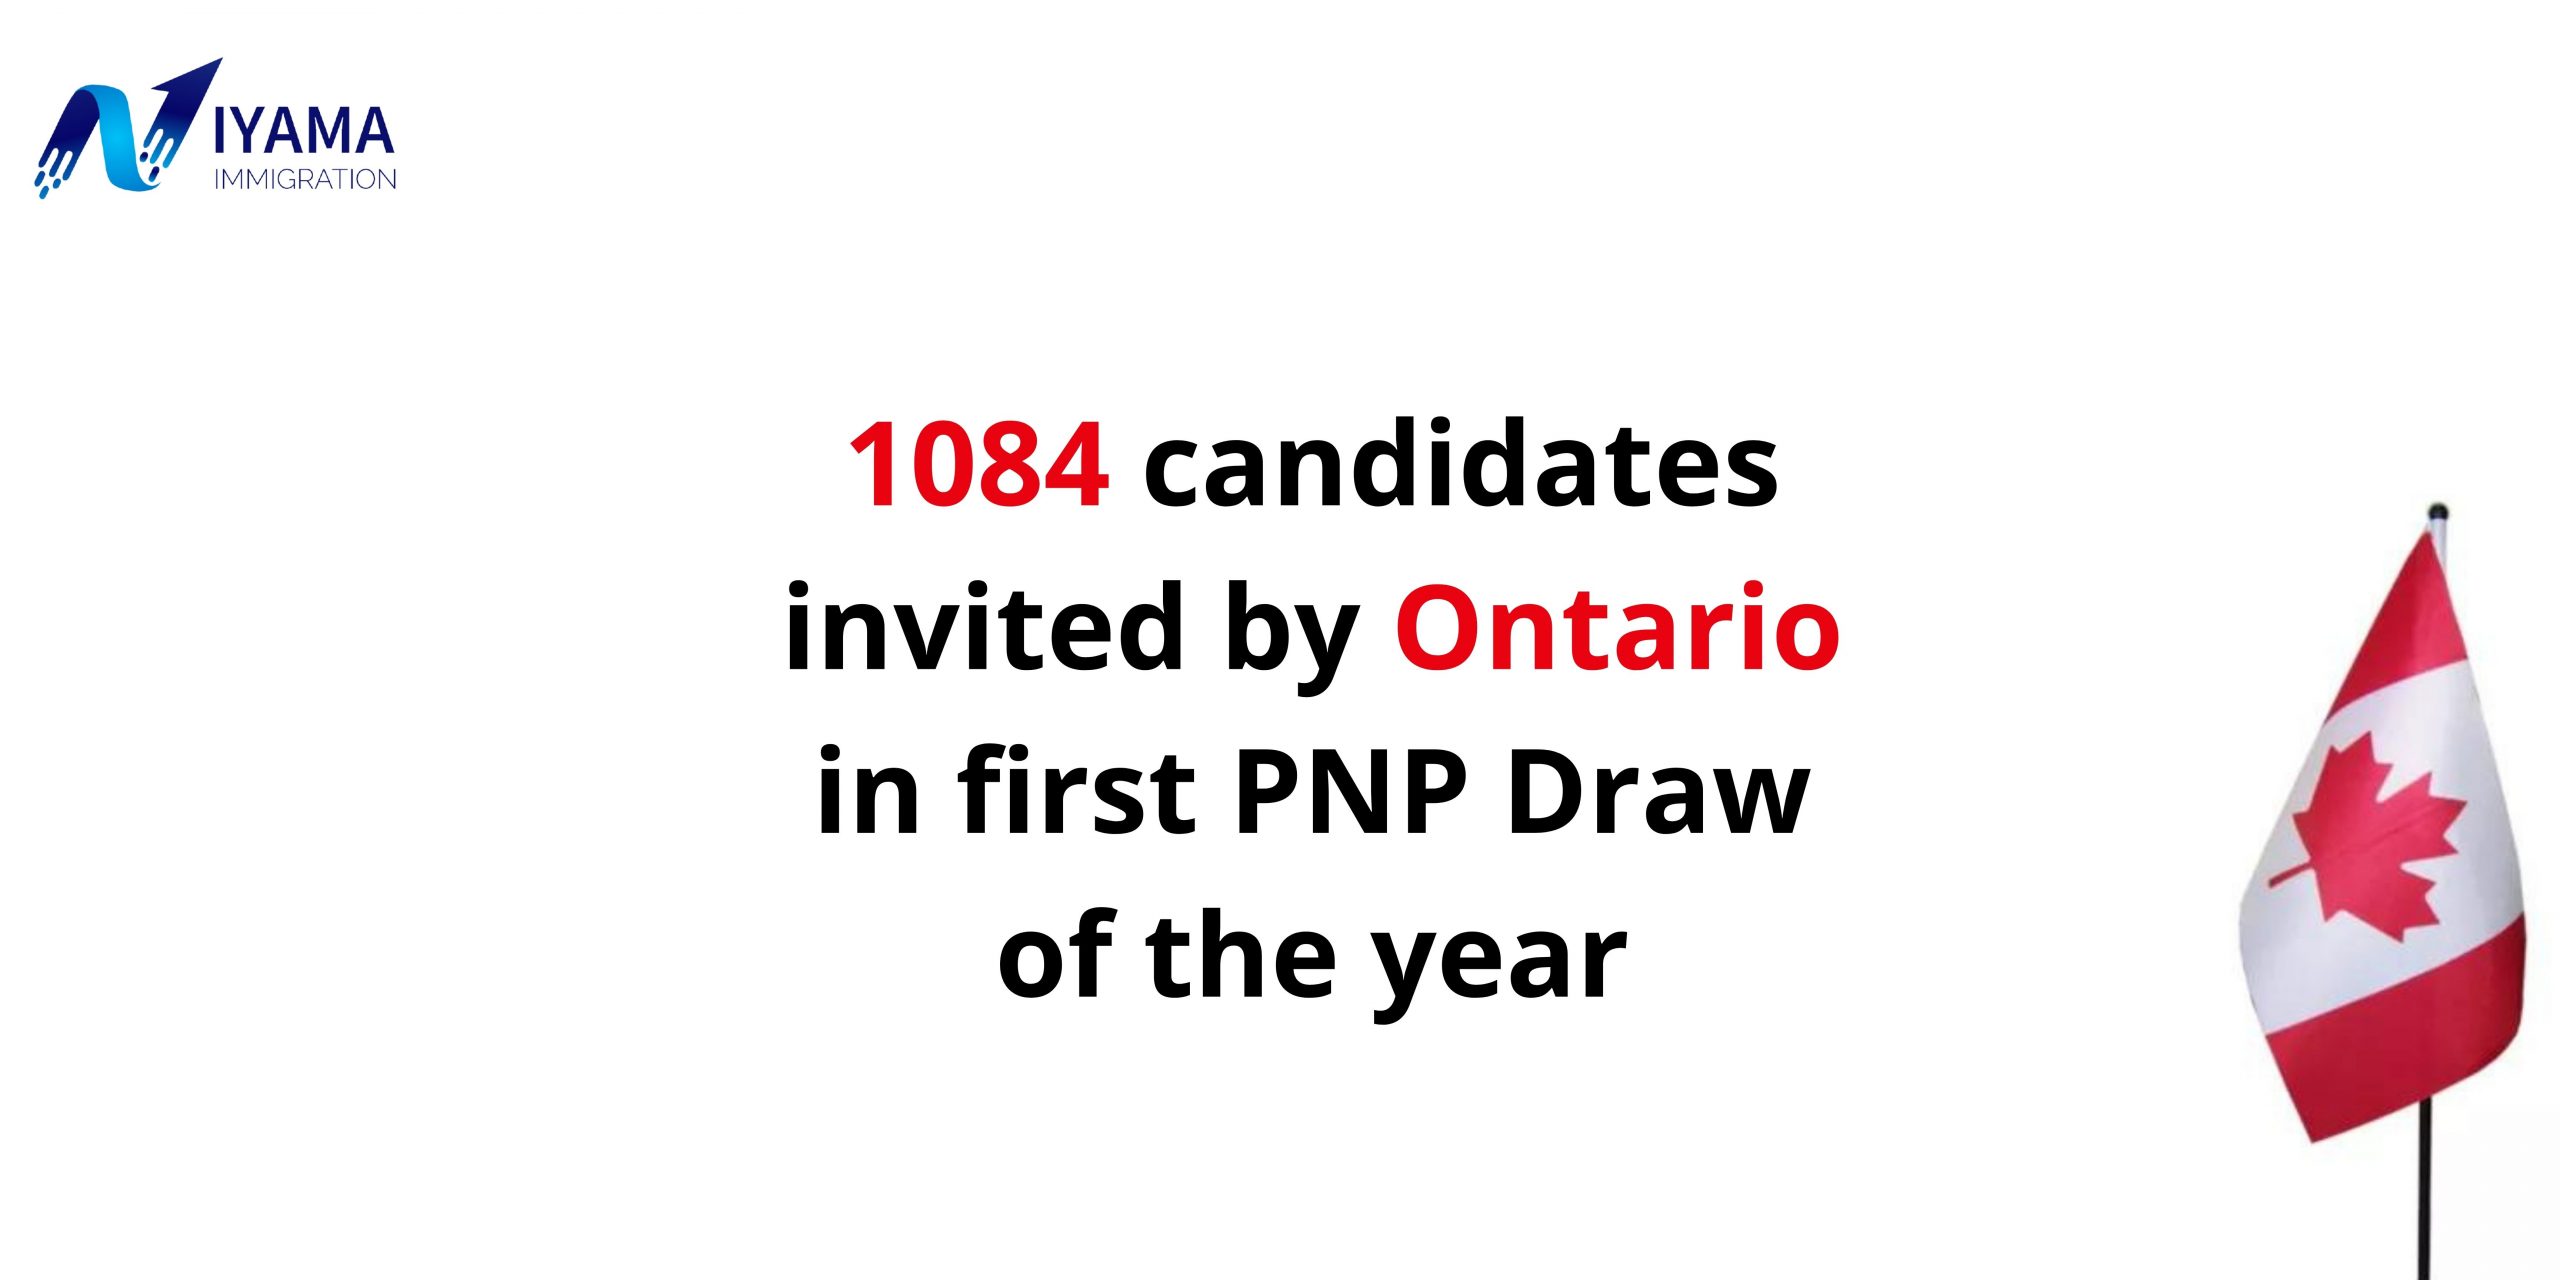 Ontario holds first PNP draw of the year